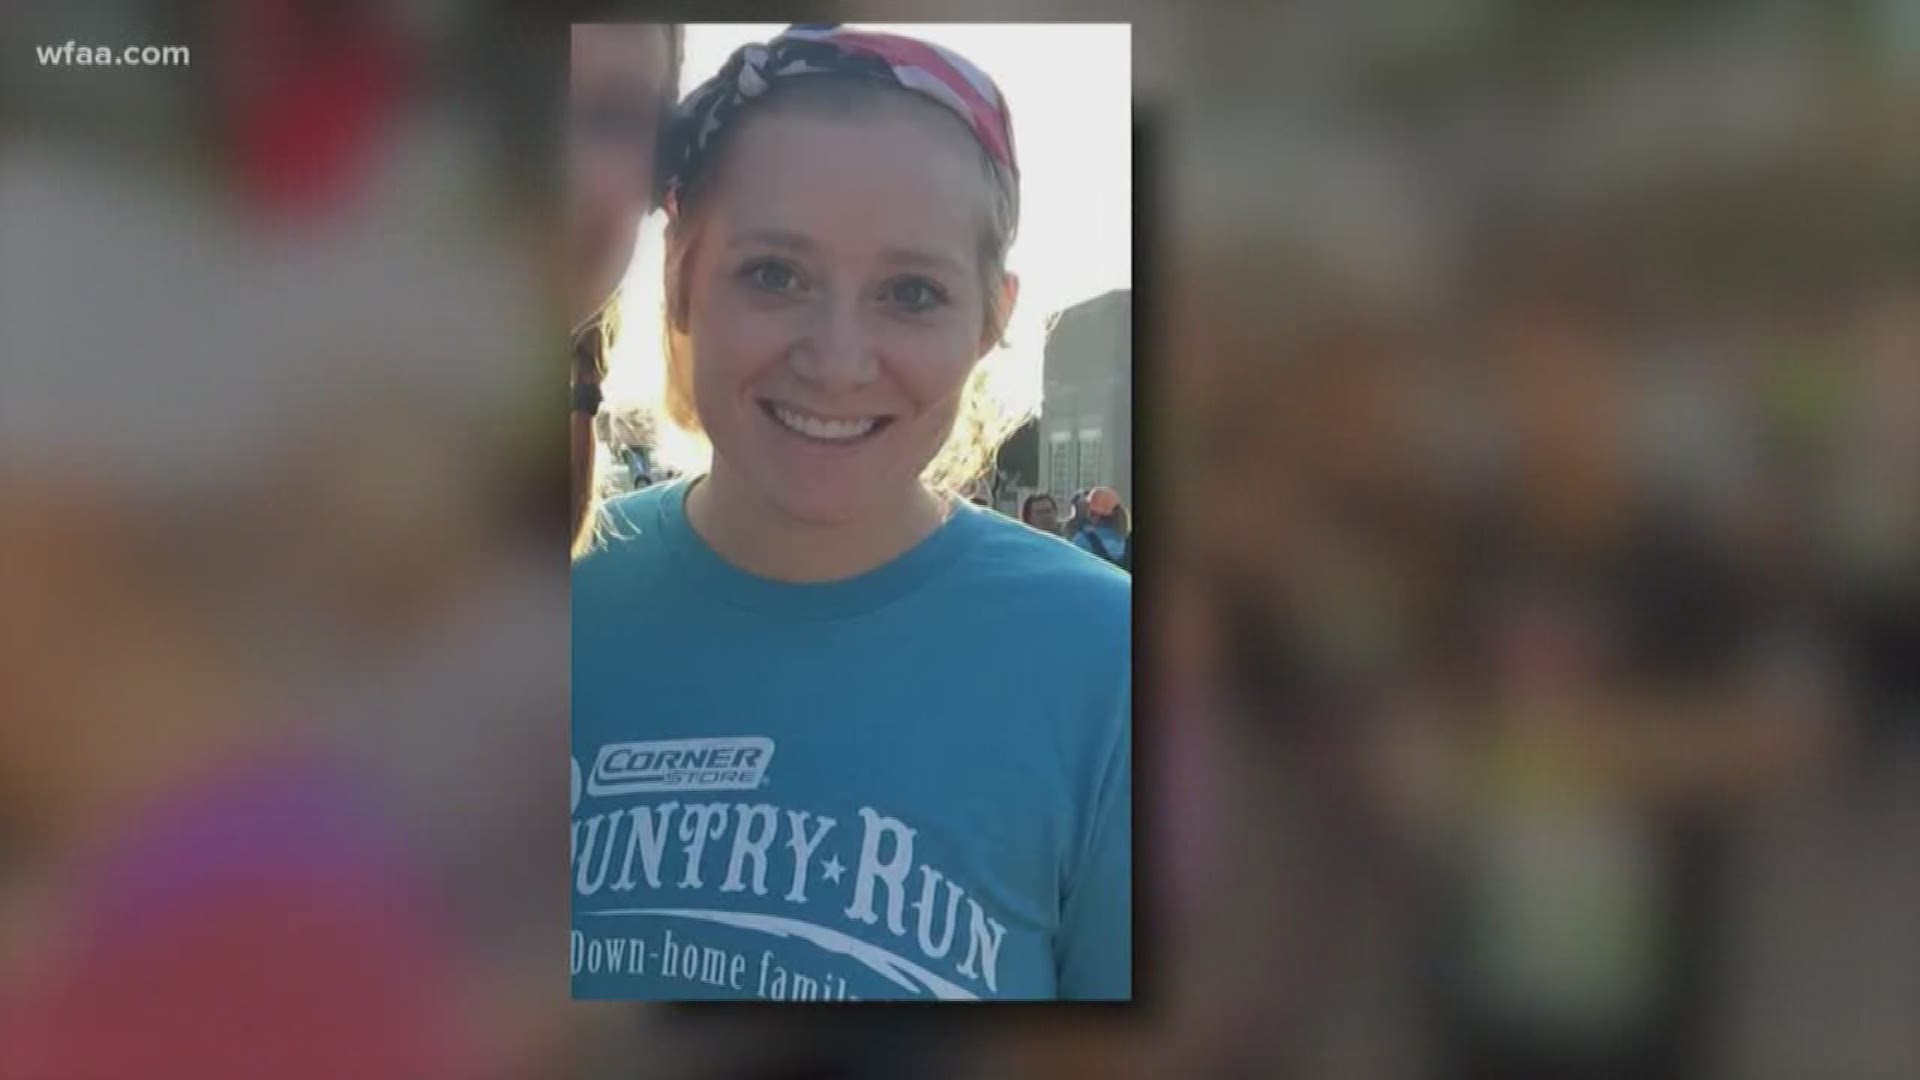 Woman asking for help to find mystery hero